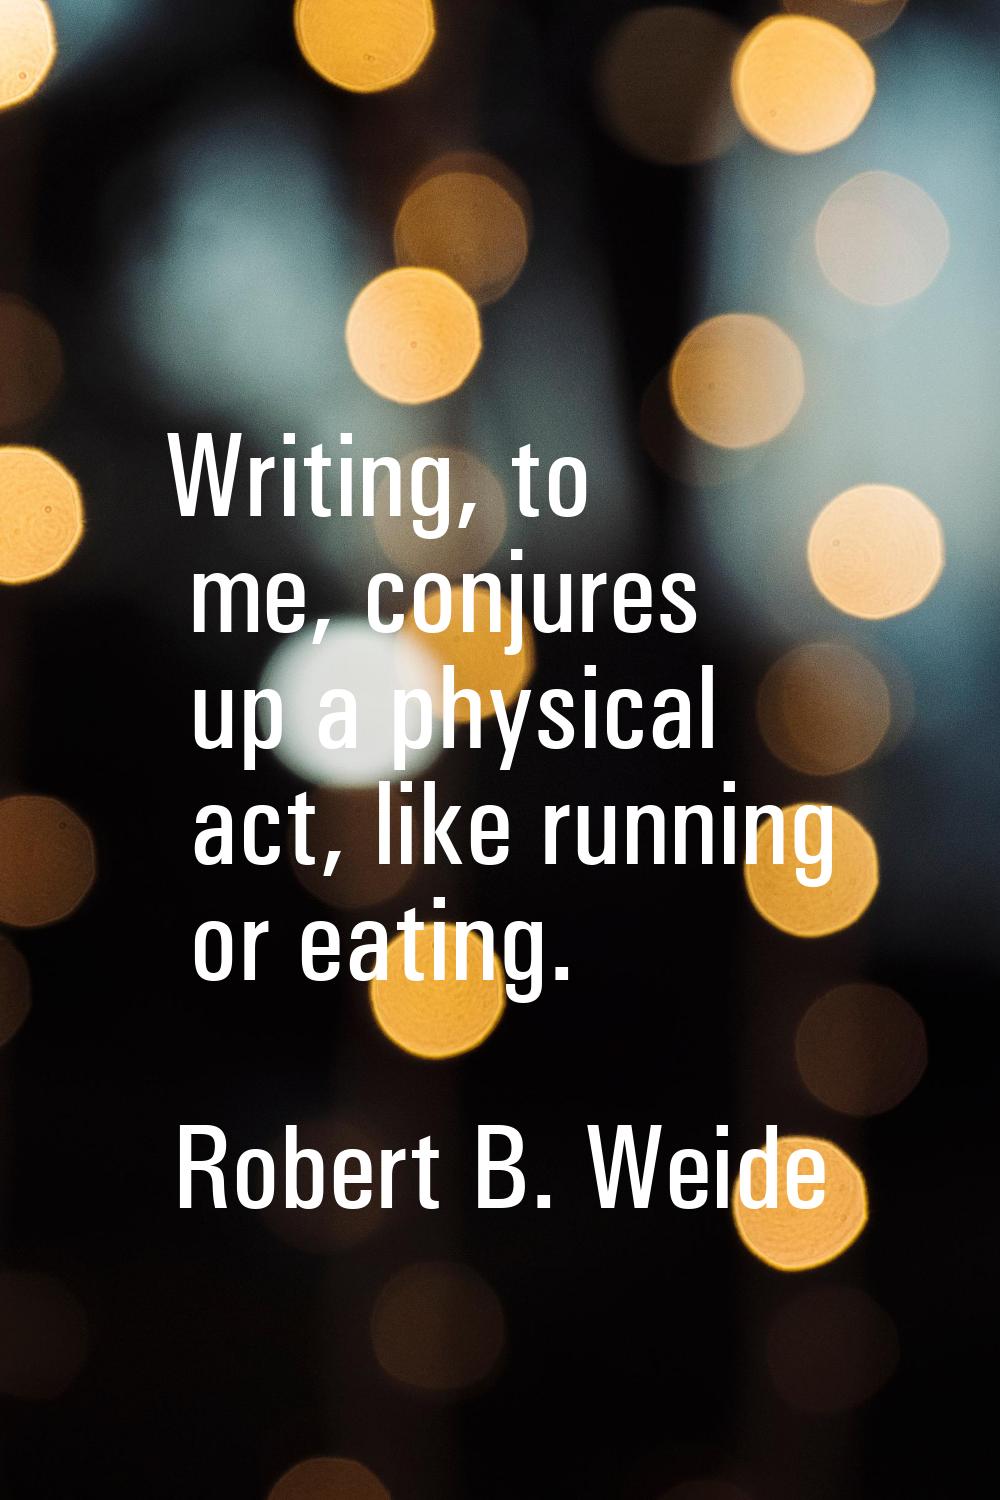 Writing, to me, conjures up a physical act, like running or eating.